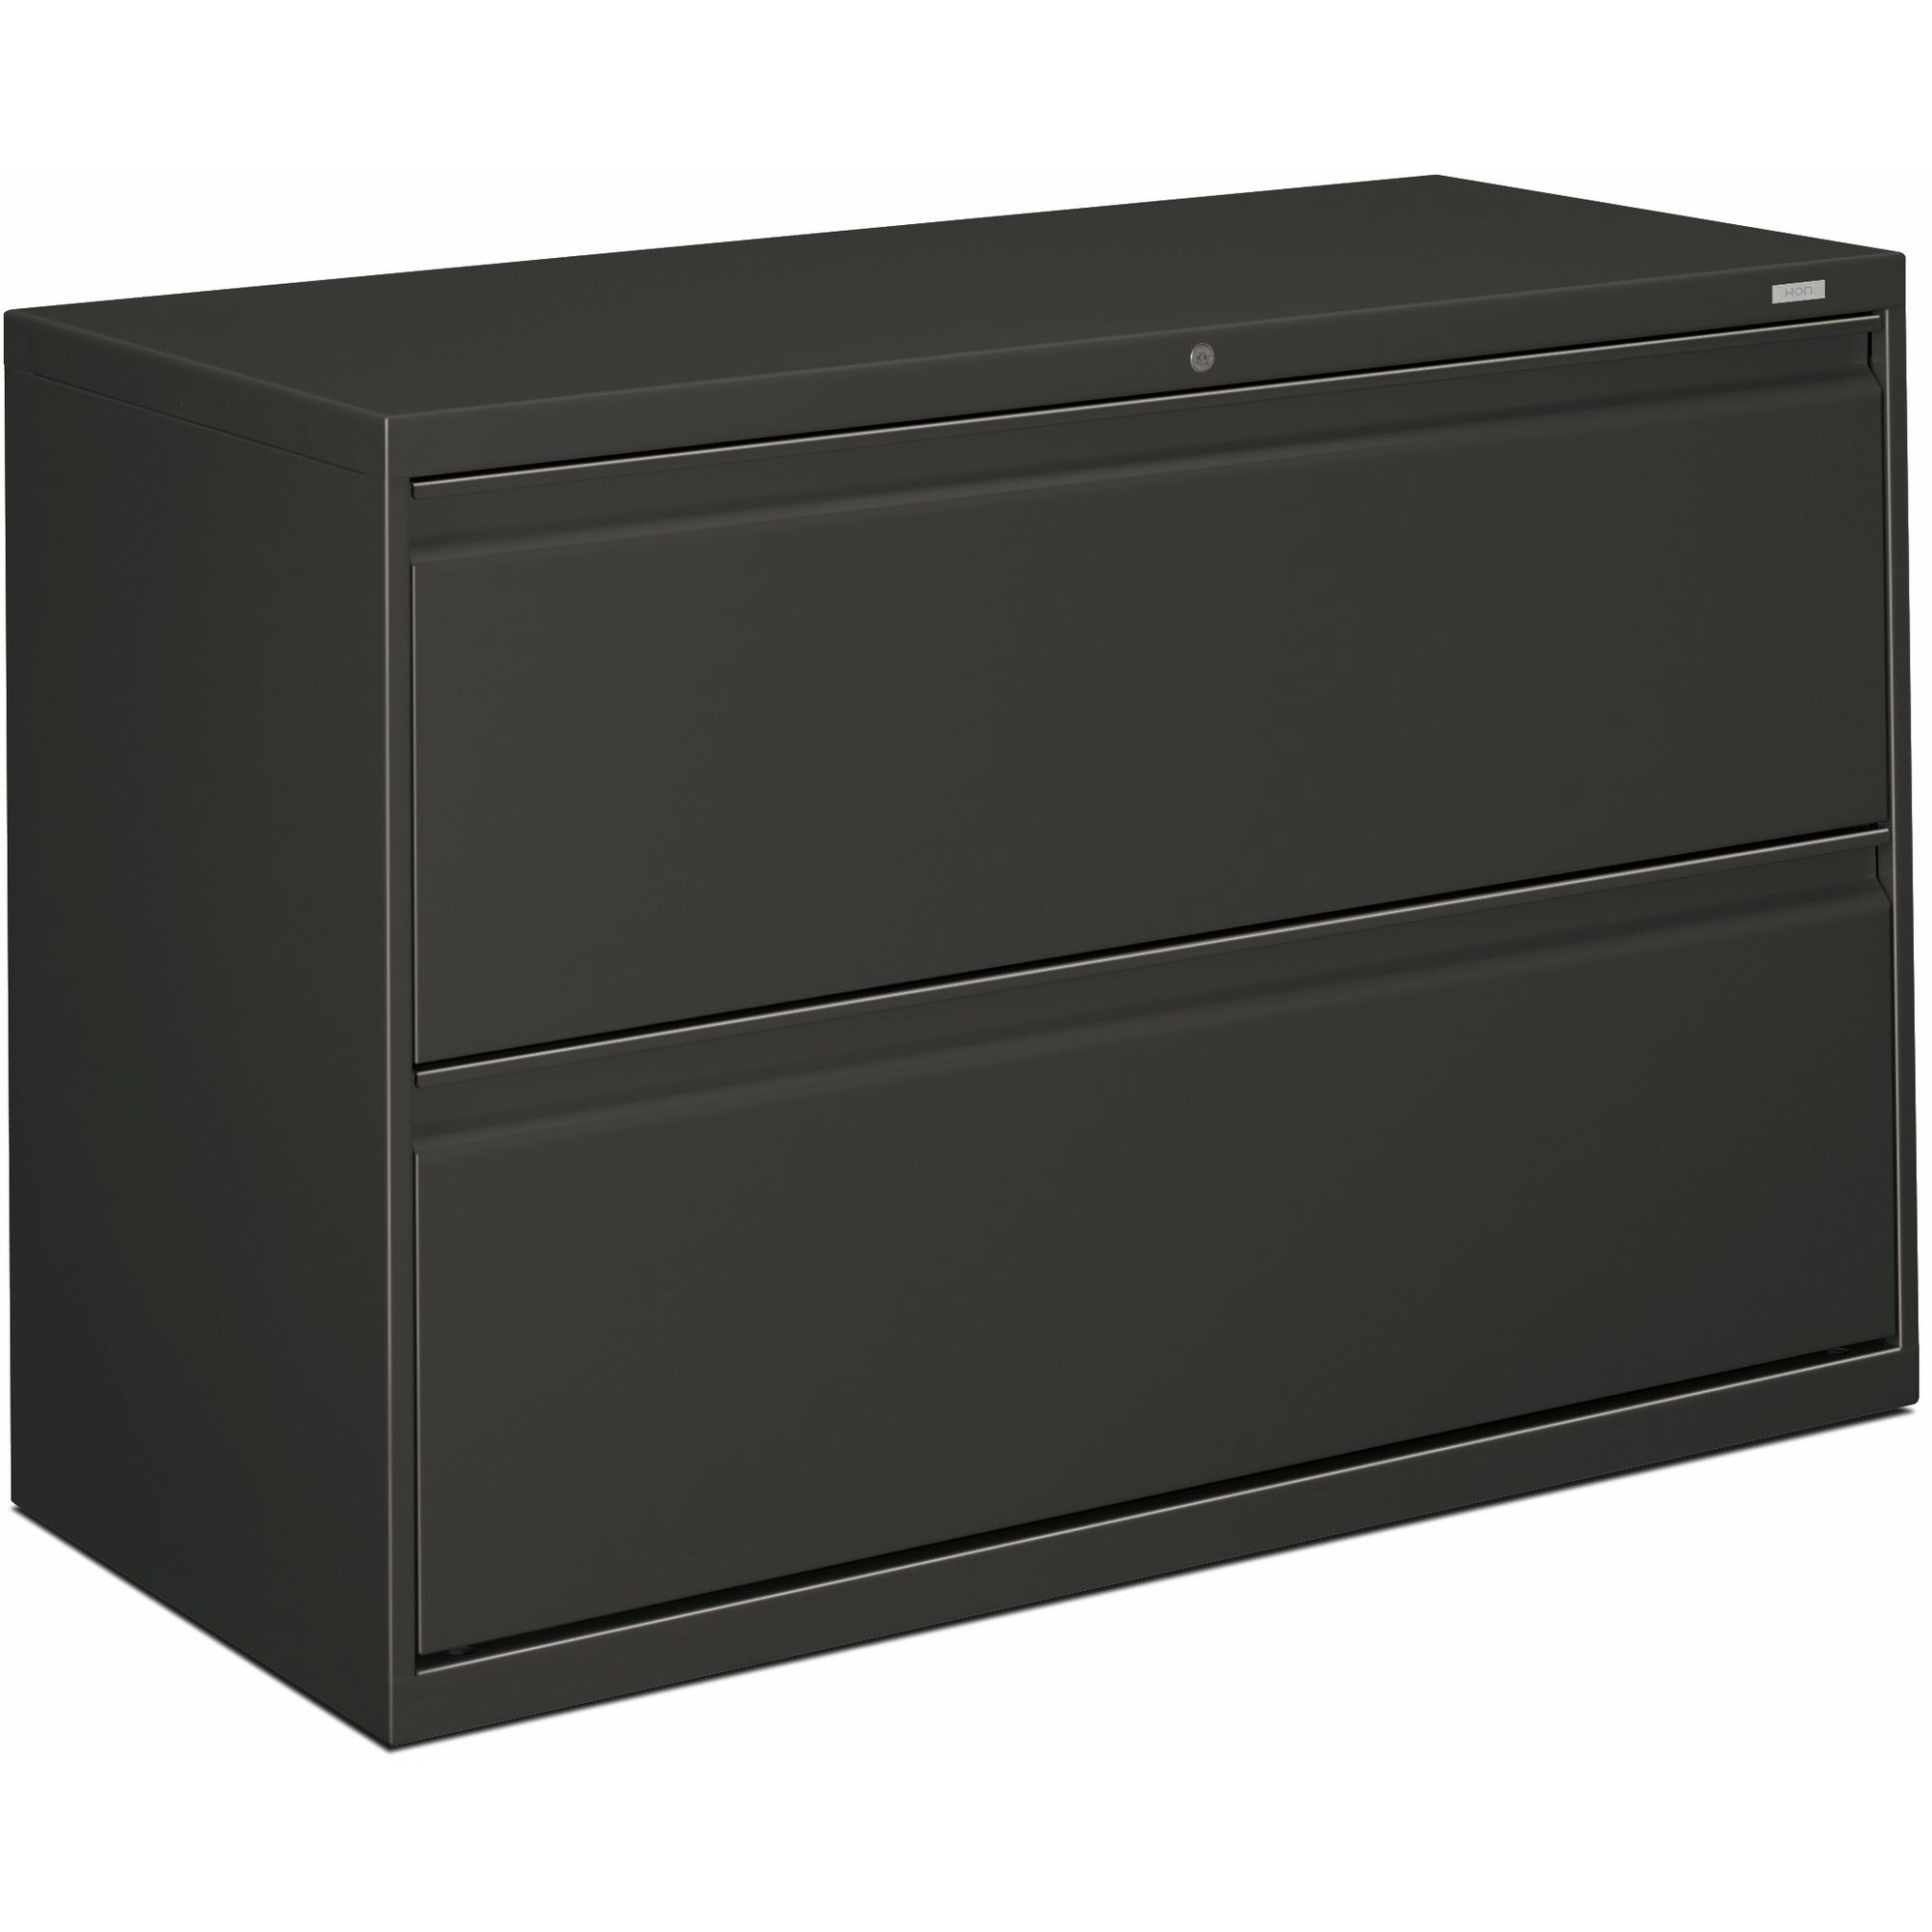 hon-brigade-800-h892-lateral-file-42-x-18284-2-drawers-finish-charcoal_hon892ls - 1